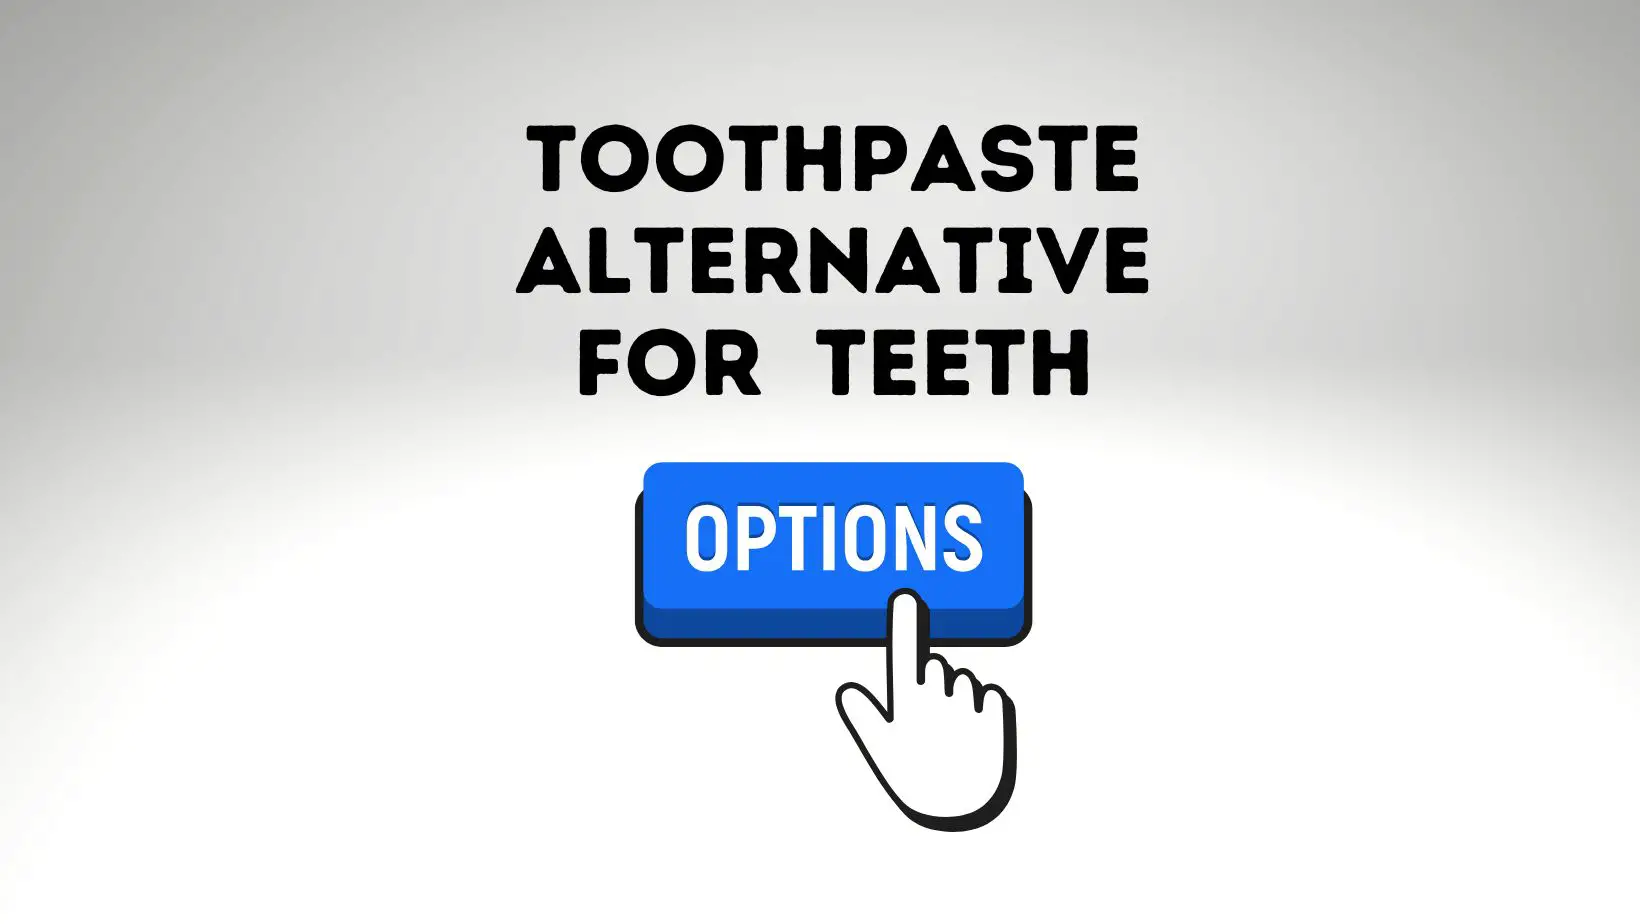 Alternative To Toothpaste For Cleaning Teeth